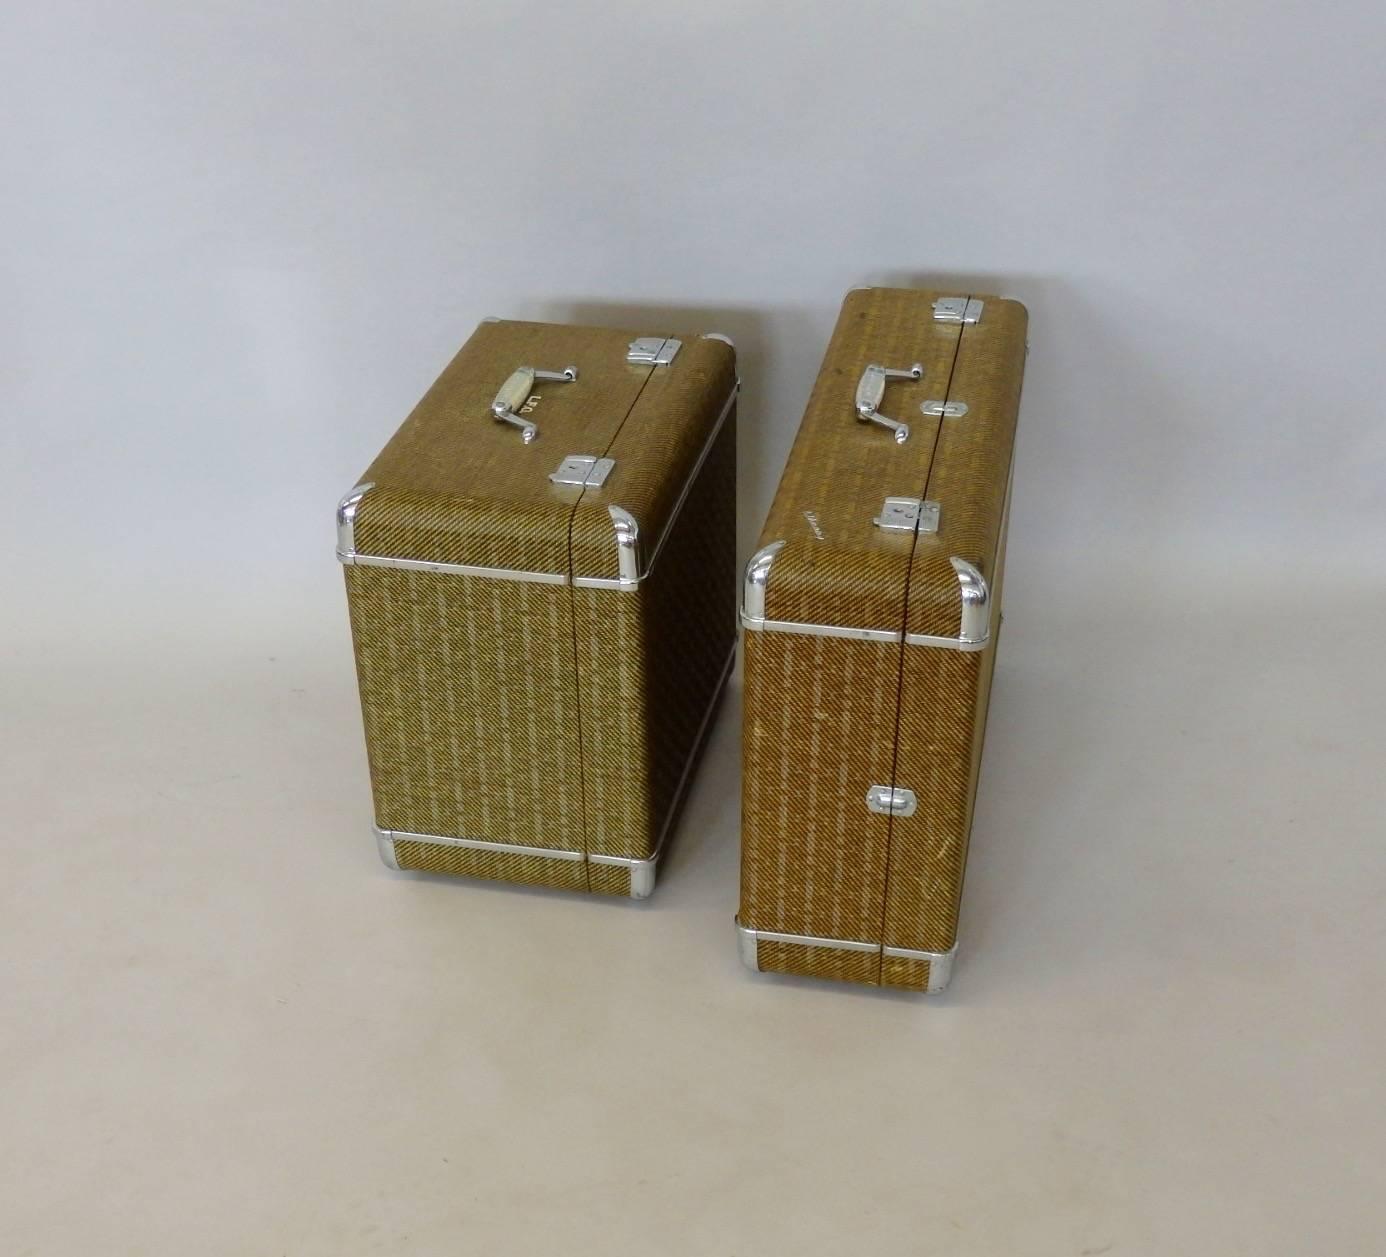 Pair of chrome trimmed Art Deco suitcases in excellent condition. Inside is immaculate chrome trim is excellent latches are in excellent working order. Mfrs label reads Wheary luggage Racine and new York. Metal tags from retail shop reads Bell